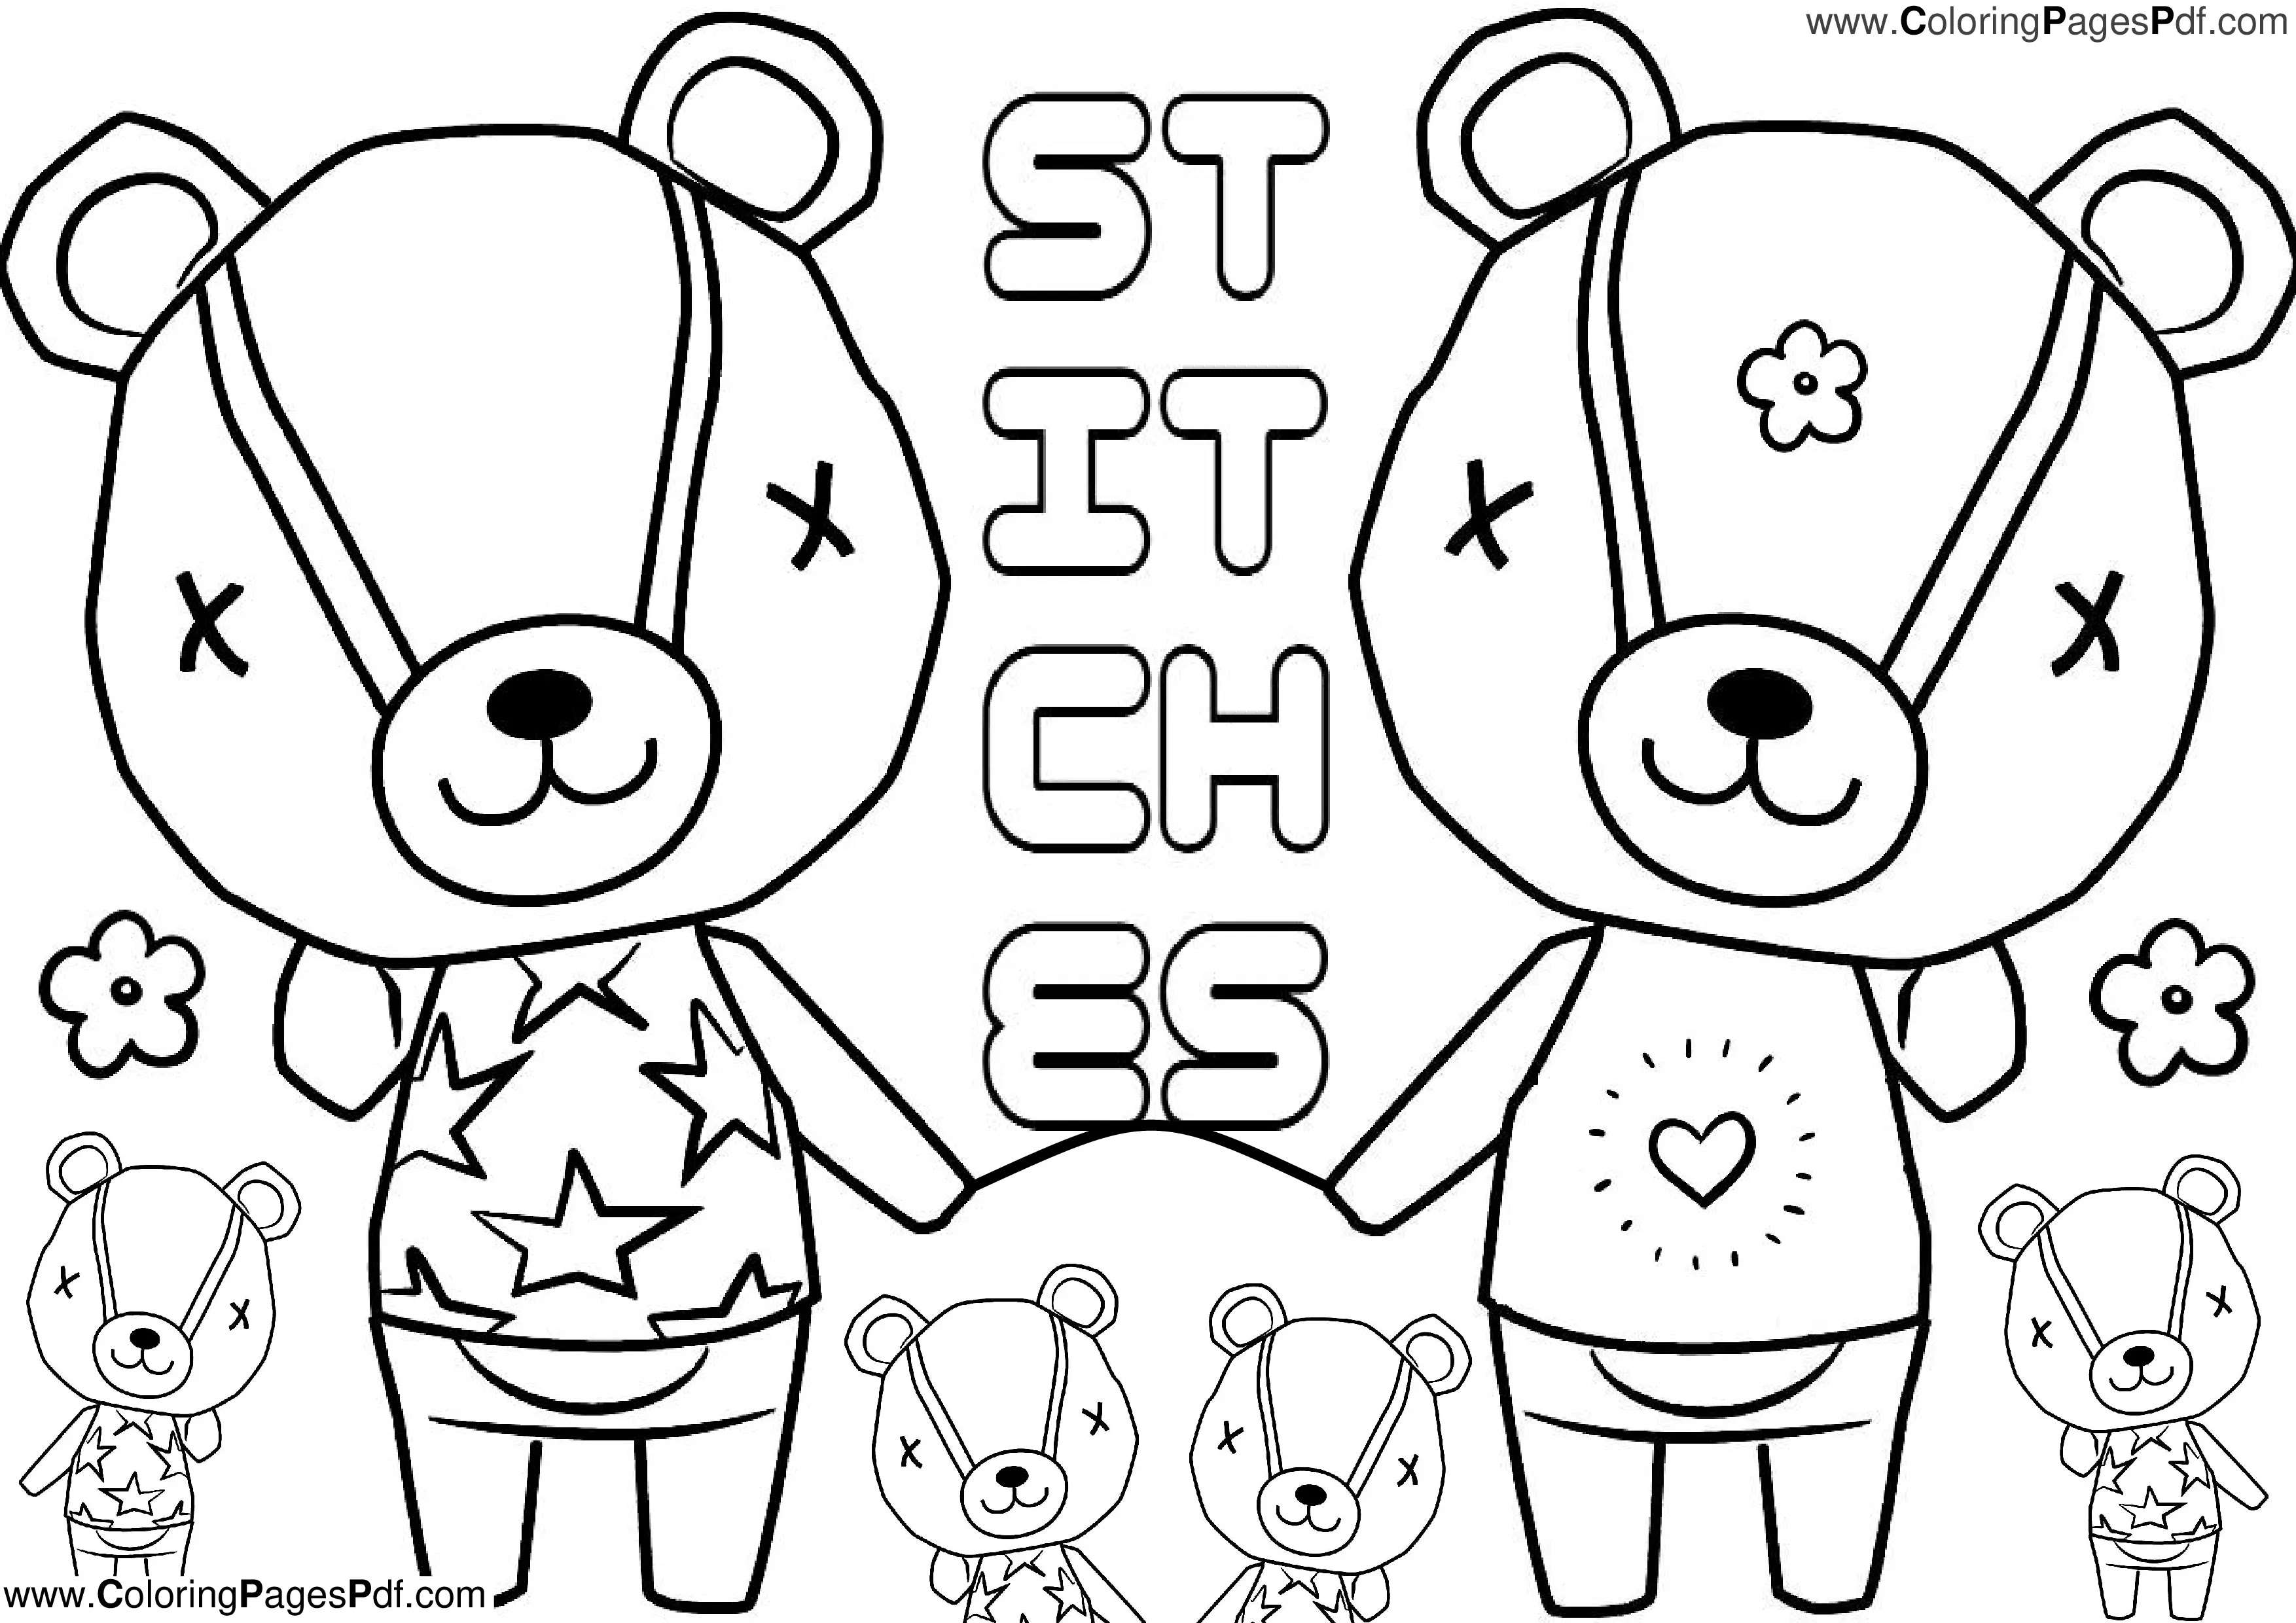 Animal crossing coloring pages stitches